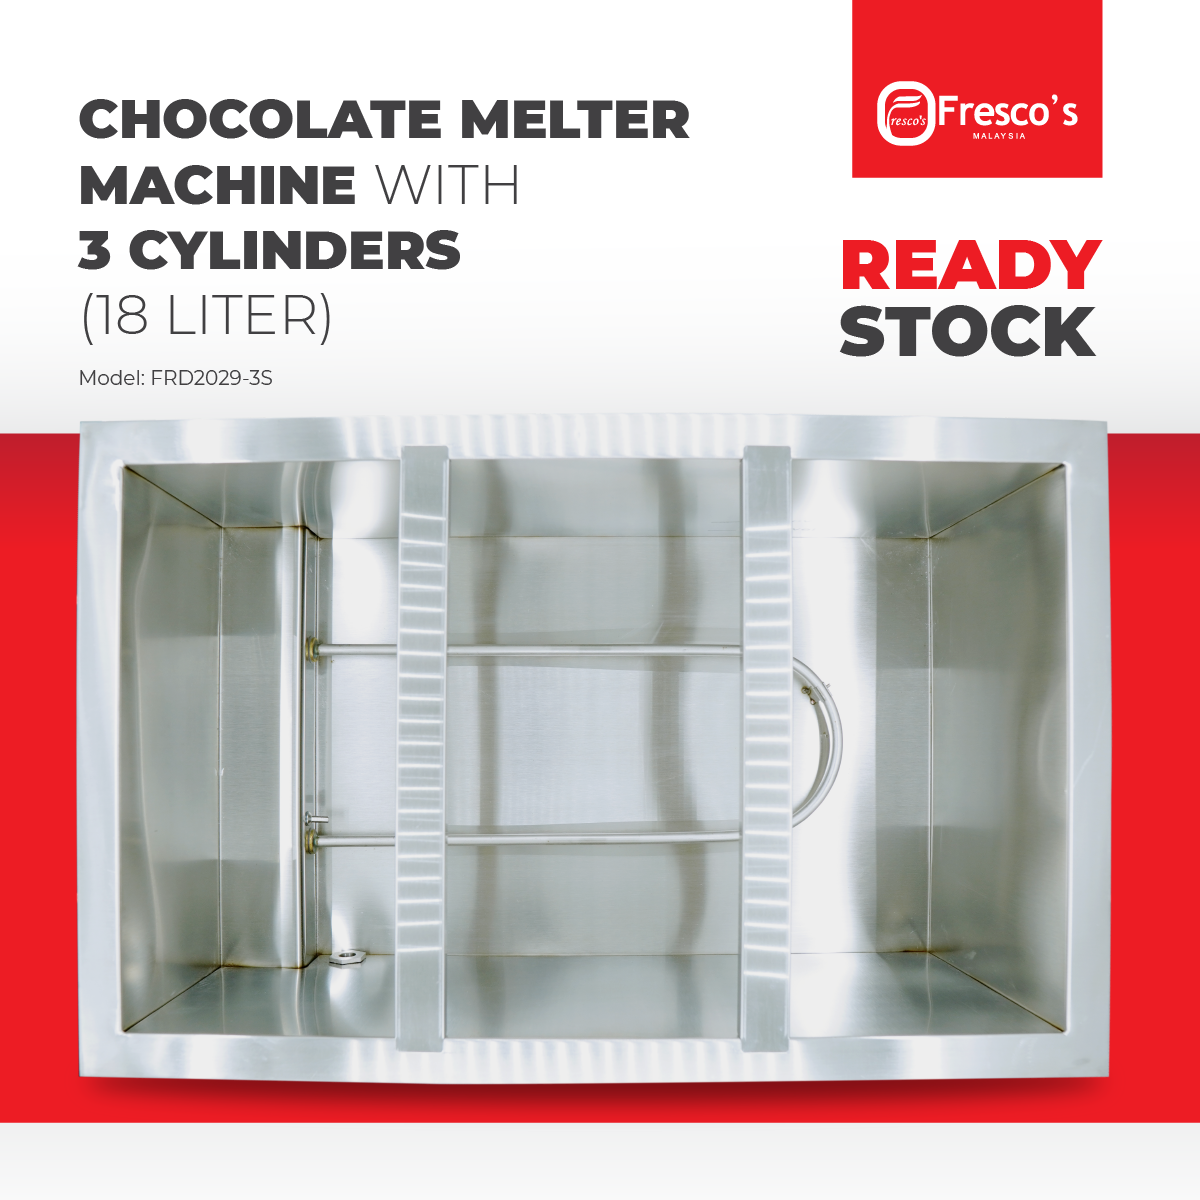 Chocolate Melter Machine With 3 Cylinders (18 Liter)